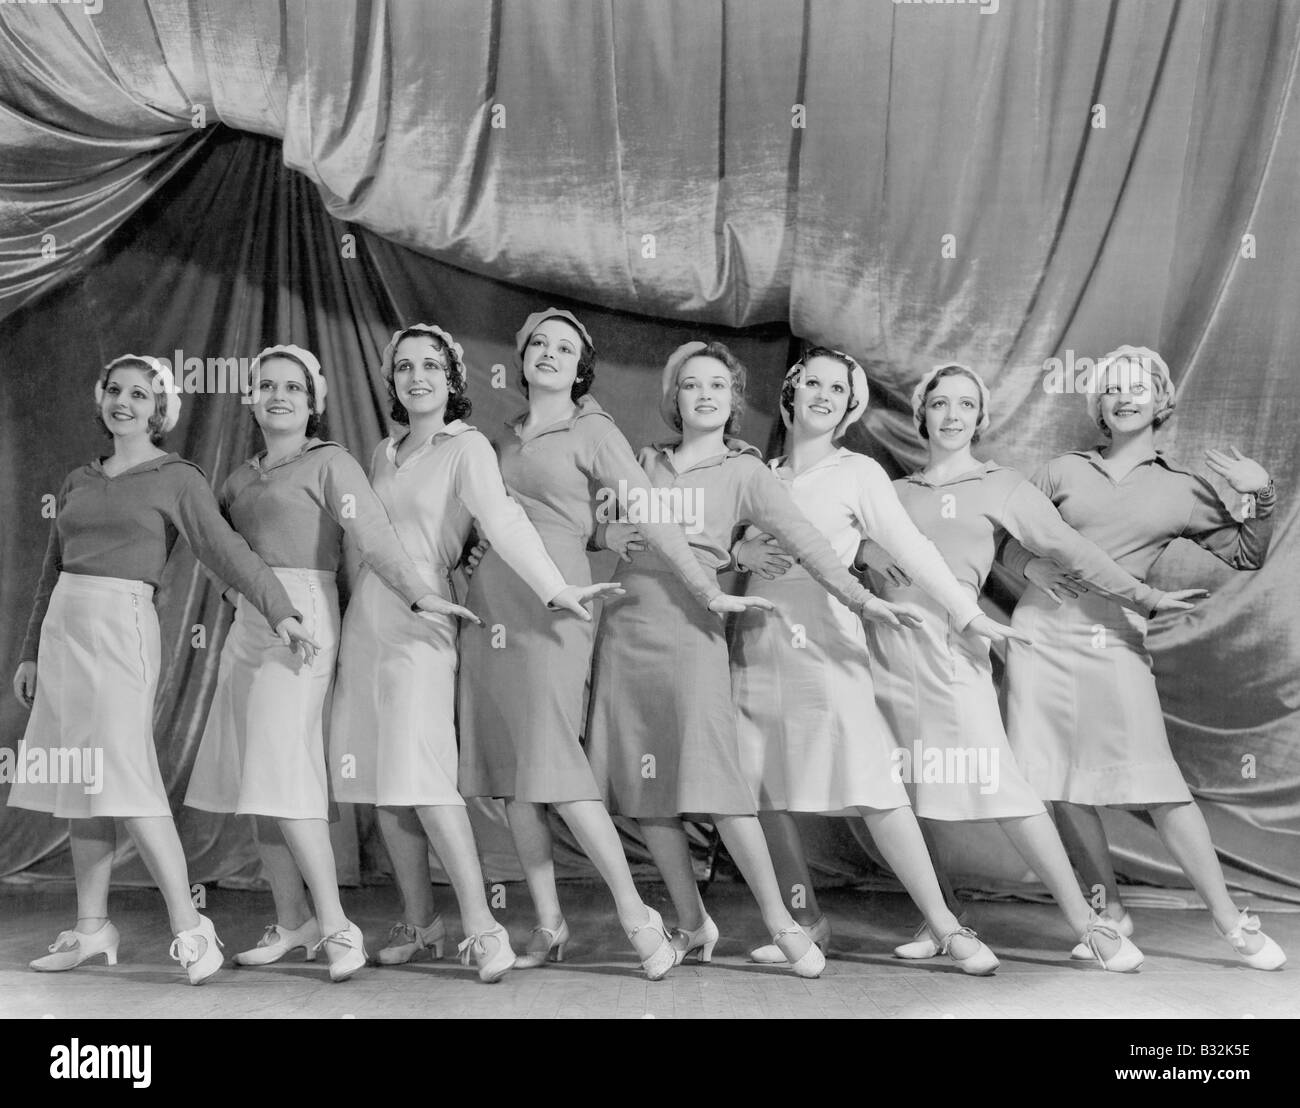 Dancers stage Black and White Stock Photos & Images - Alamy